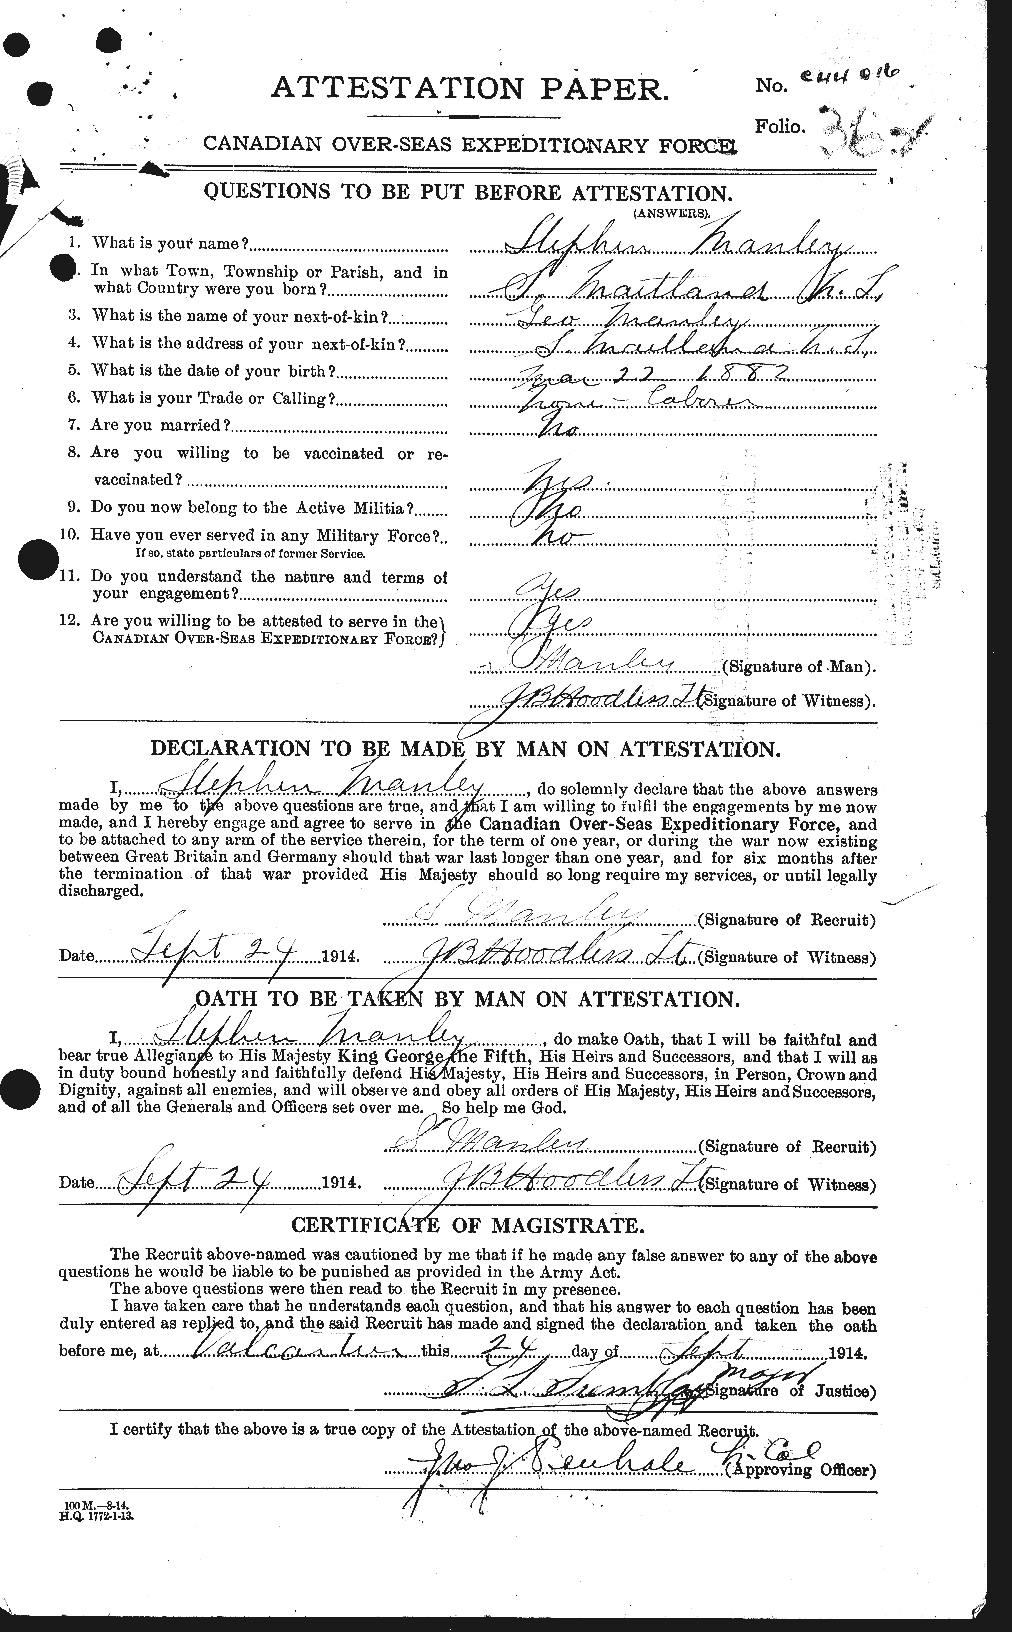 Personnel Records of the First World War - CEF 477019a